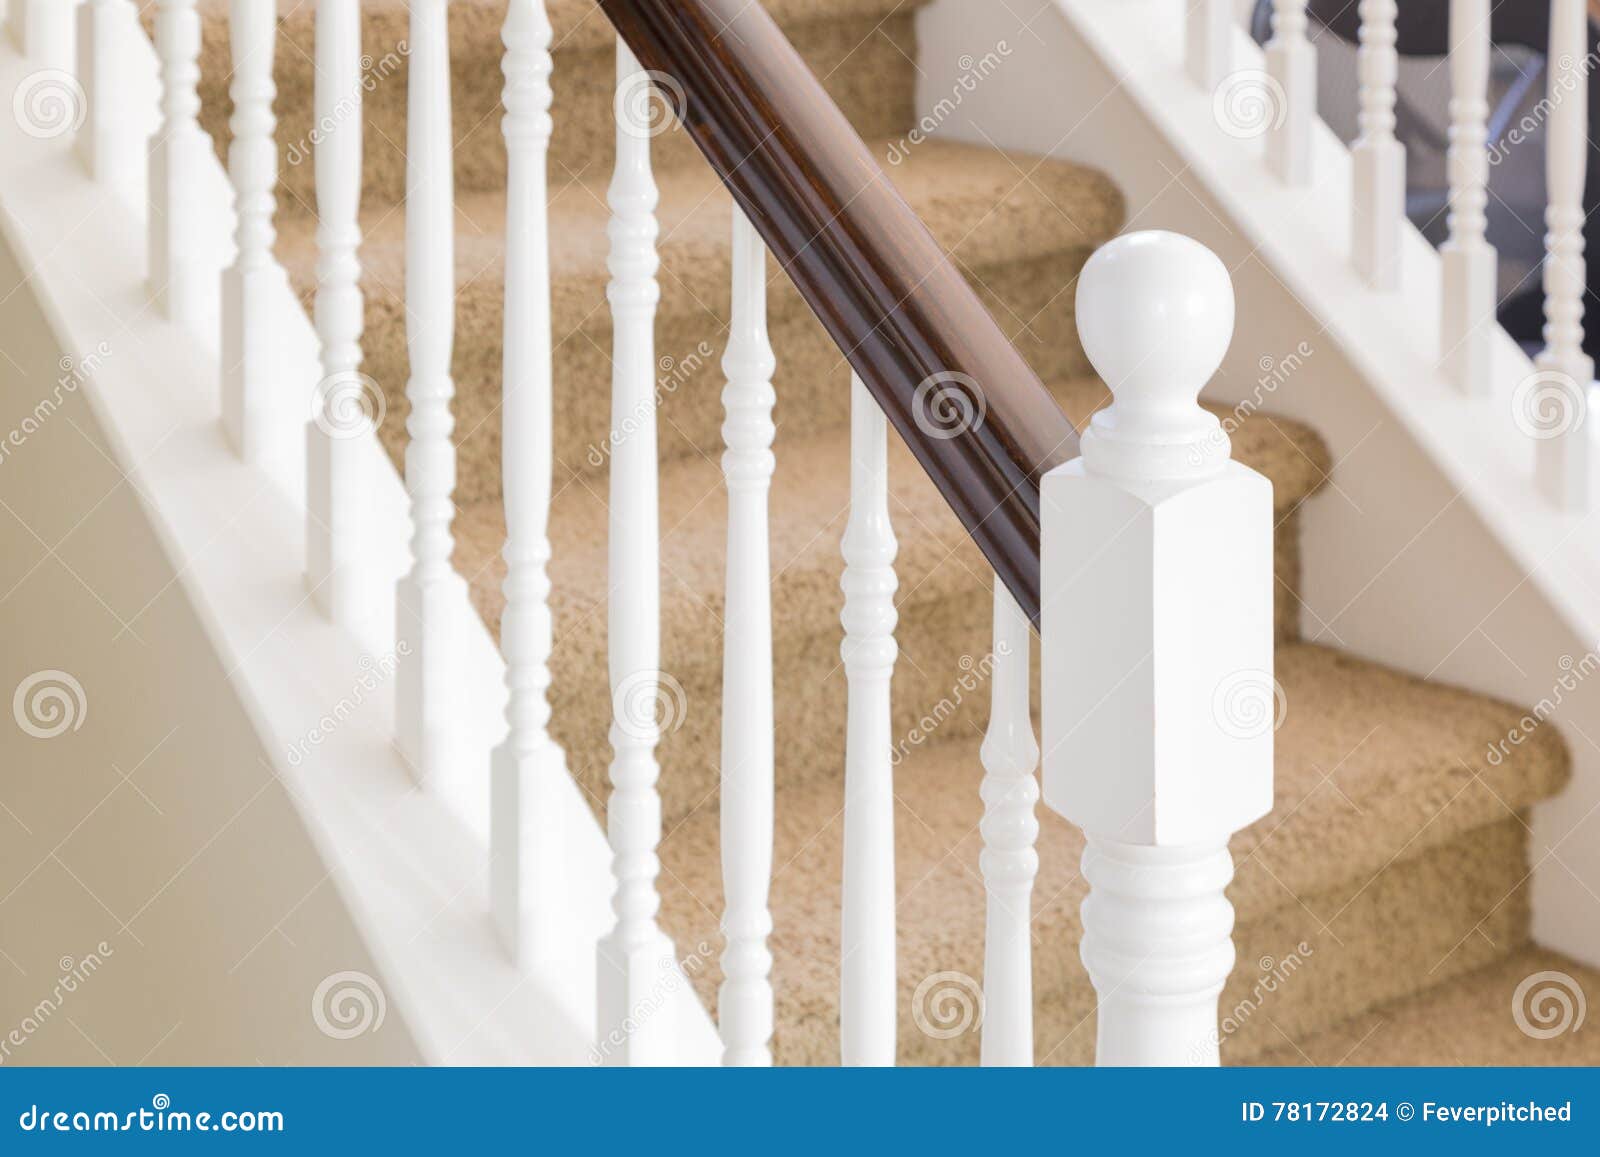 abstract of stair railing and carpeted steps in house